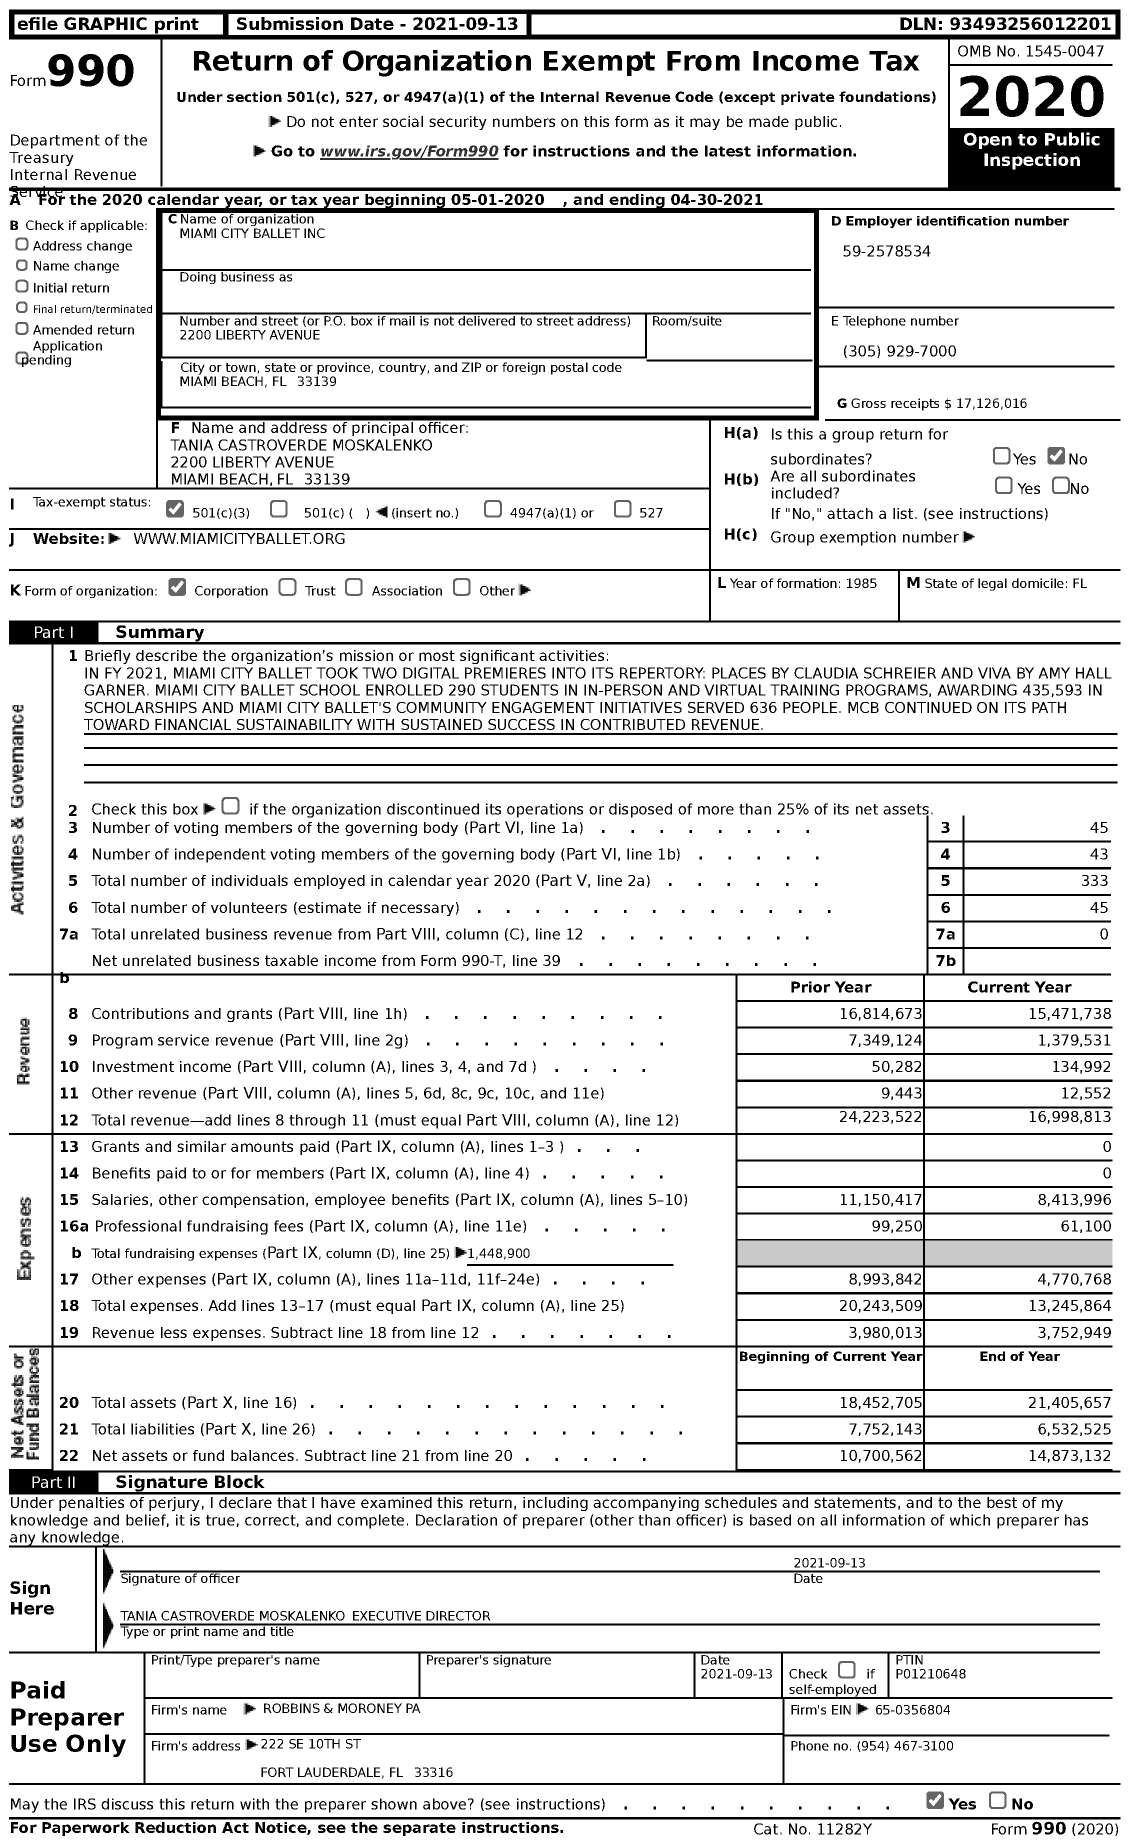 Image of first page of 2020 Form 990 for Miami City Ballet (MCB)